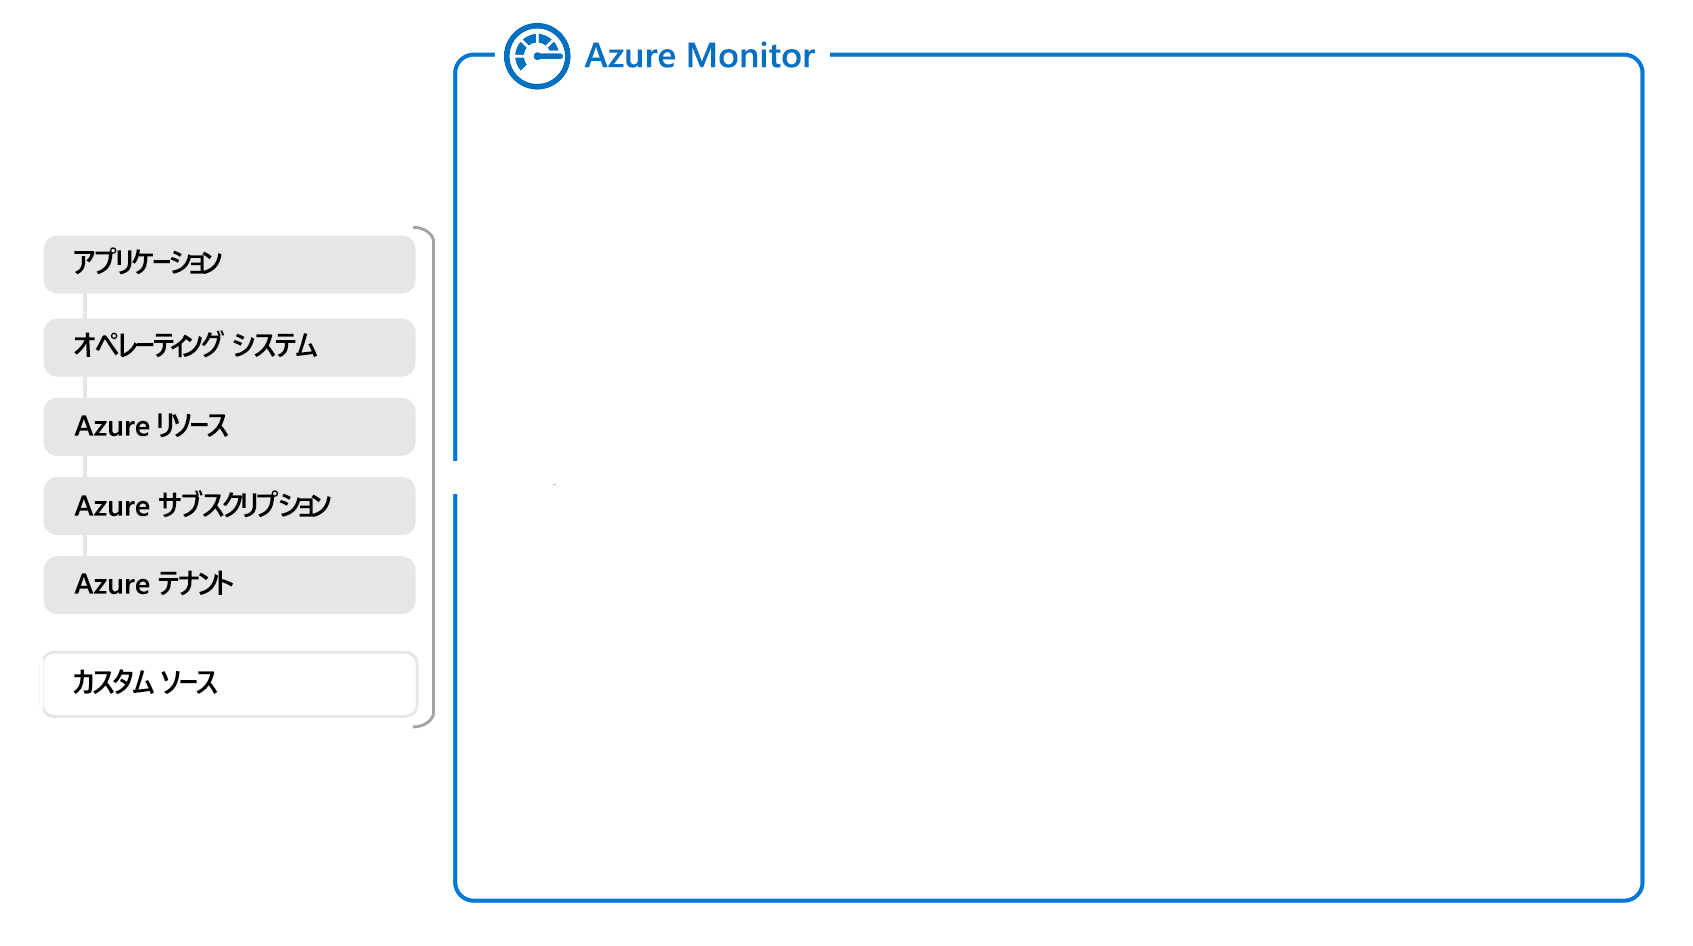 Diagram of a partial overview of Azure Monitor showing data sources.